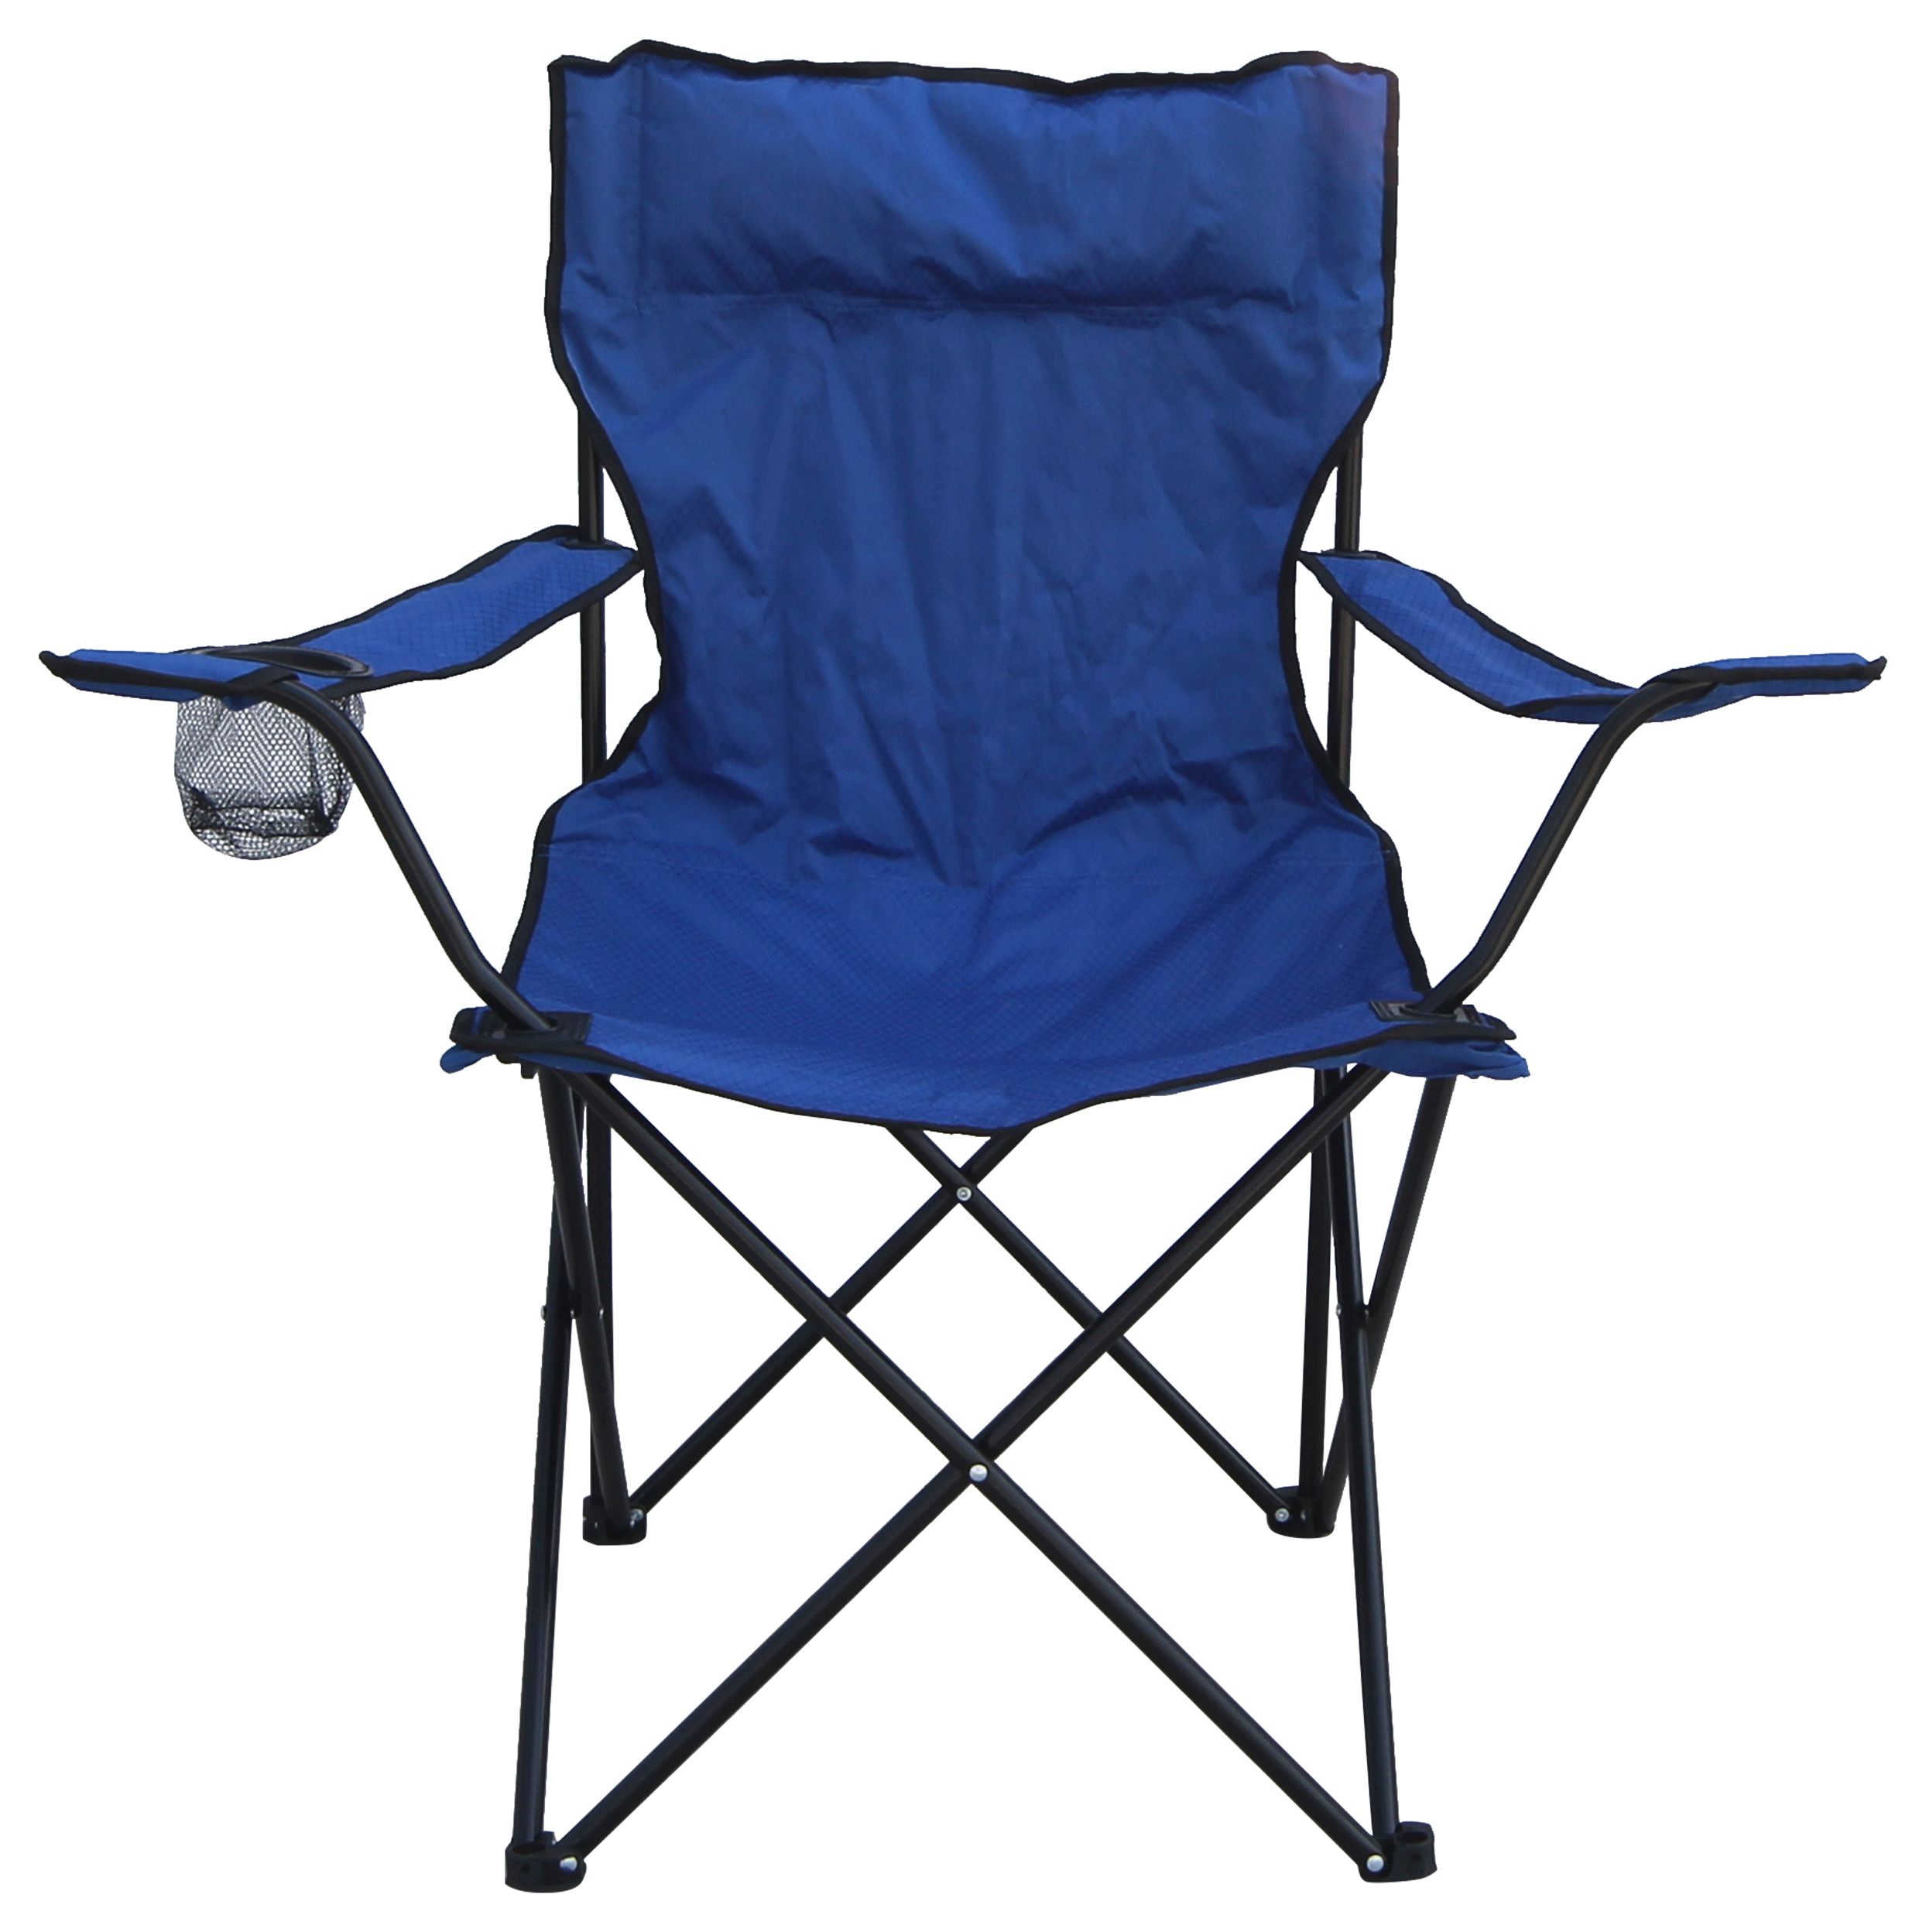 Deluxe Lightweight Camping Chair - Blue